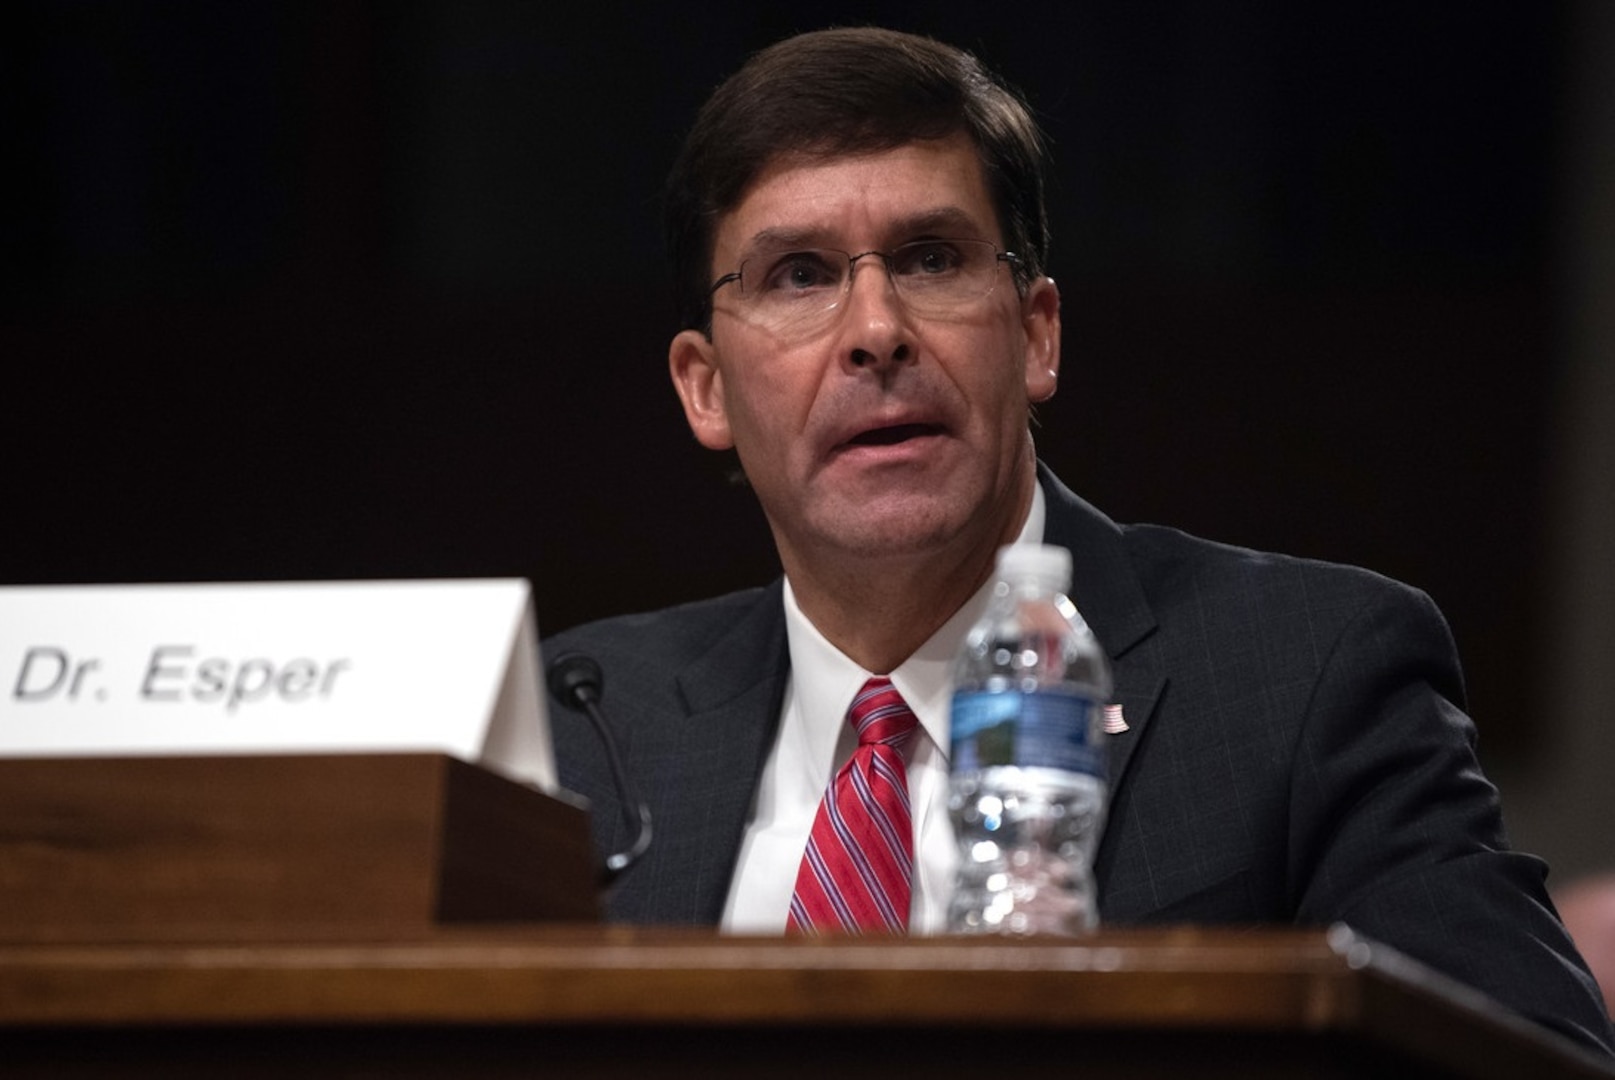 U.S. Secretary of the Army Dr. Mark T. Esper answers questions from members of the Senate Armed Services Committee during his confirmation hearing at the Dirksen Senate Office Building, Washington, D.C., July 16. Esper was nominated for Secretary of Defense by President Donald J. Trump July 15.